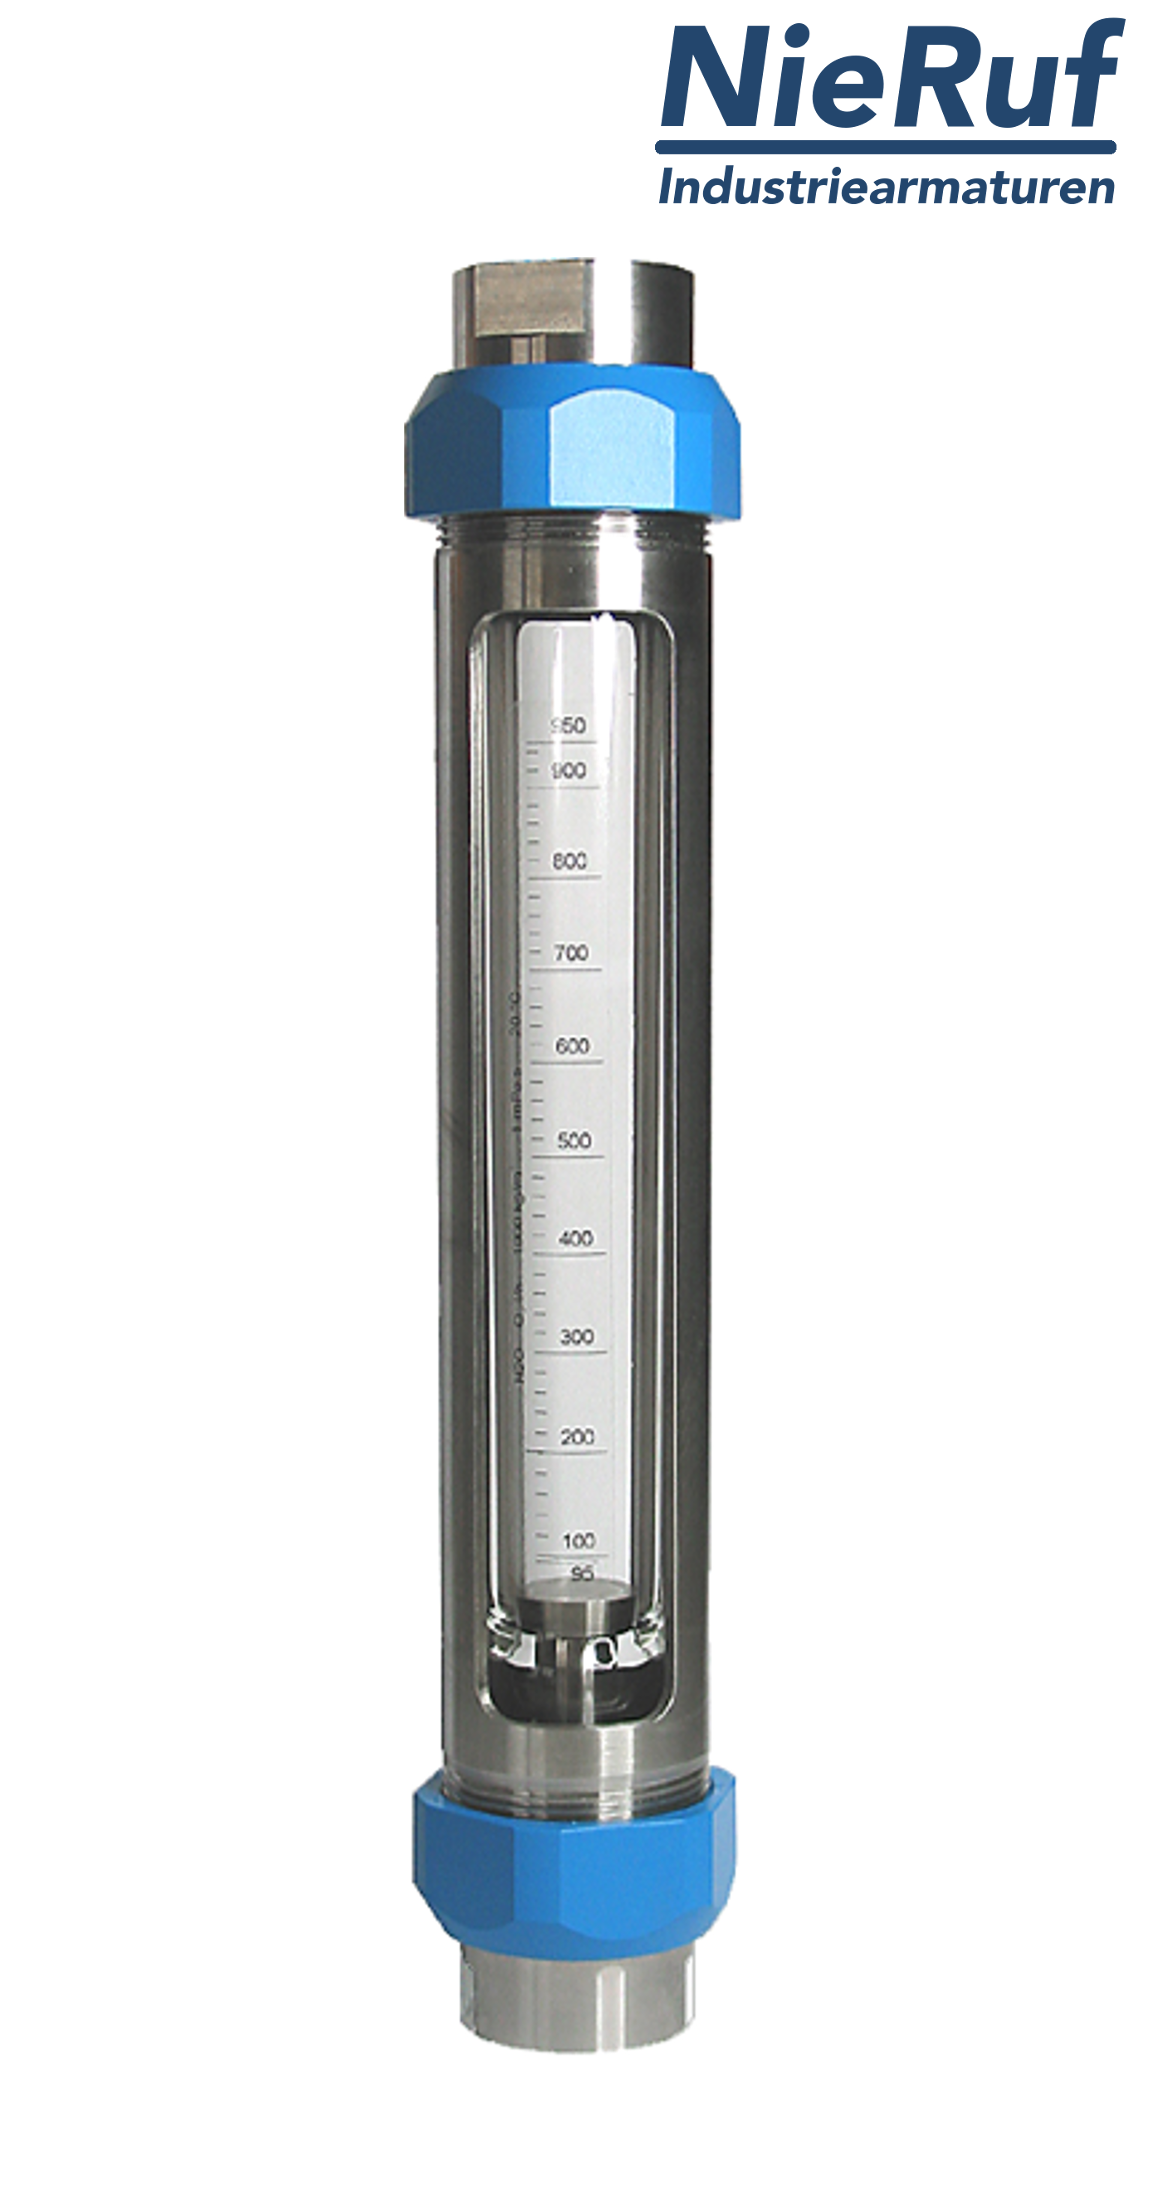 Variable area flowmeter stainless steel + borosilicate 1" Inch 1300.0 - 13000.0 l/h air FKM